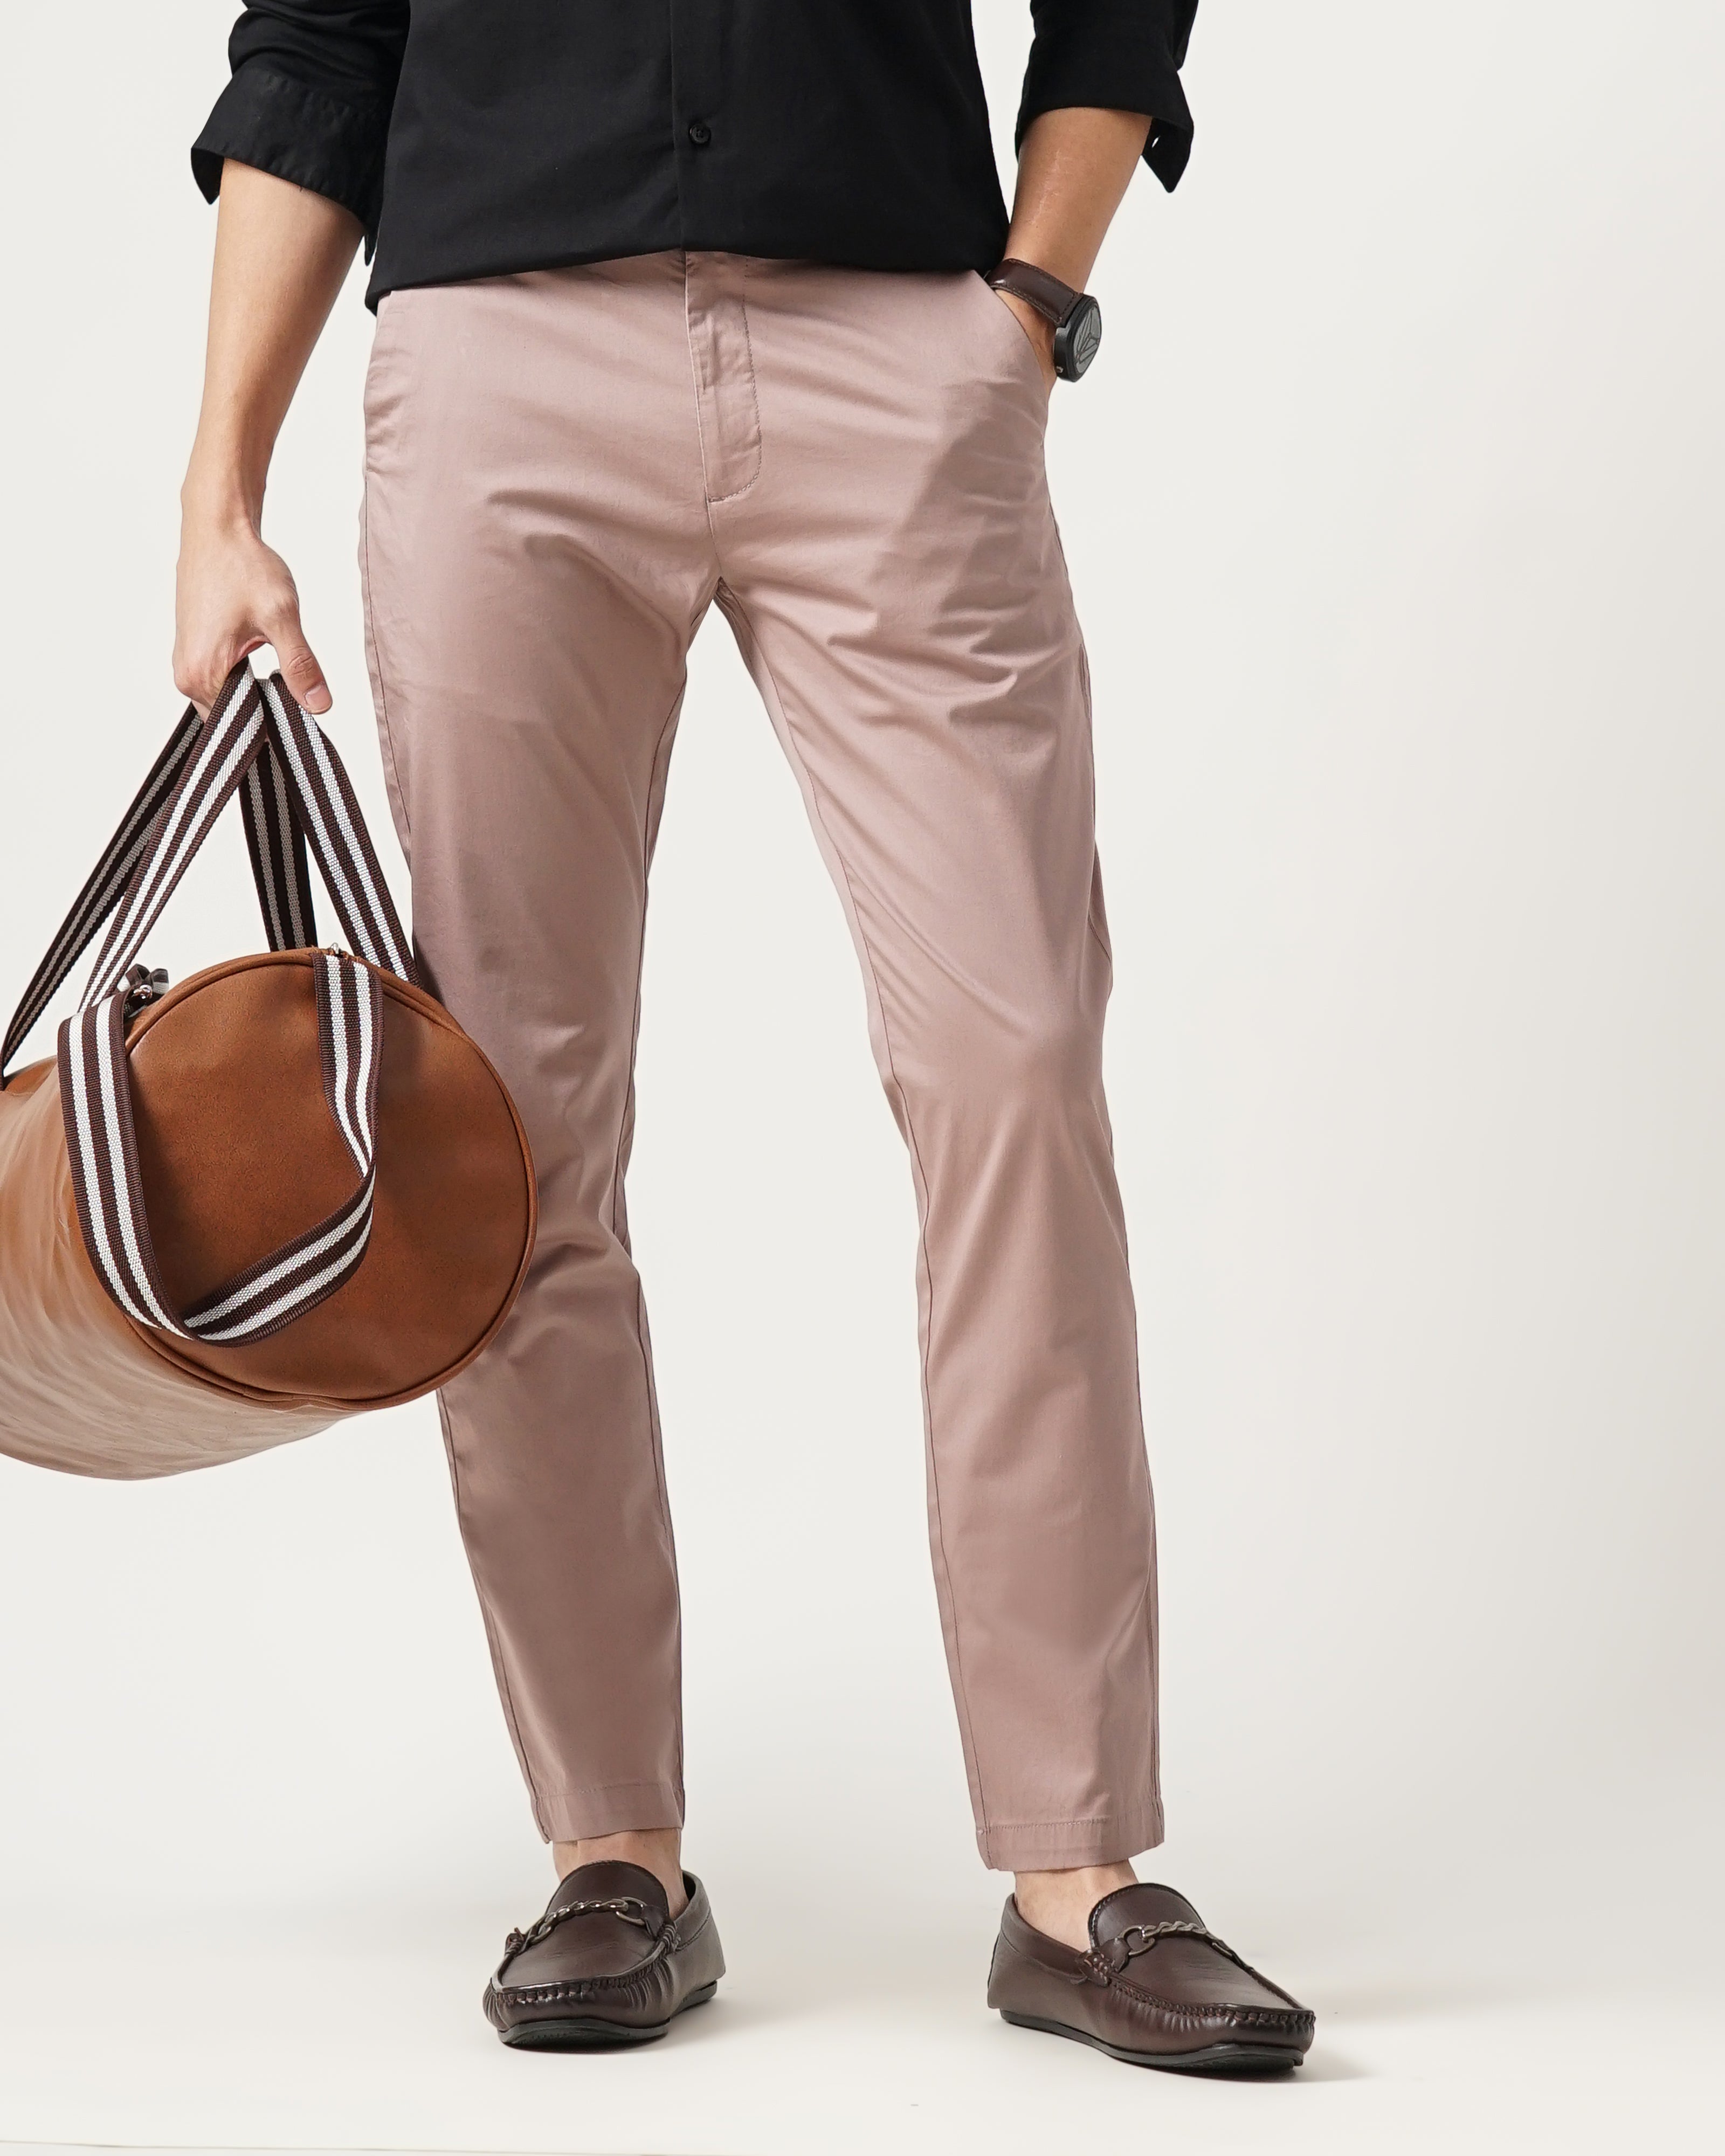 MEN'S CASUAL CHINOS